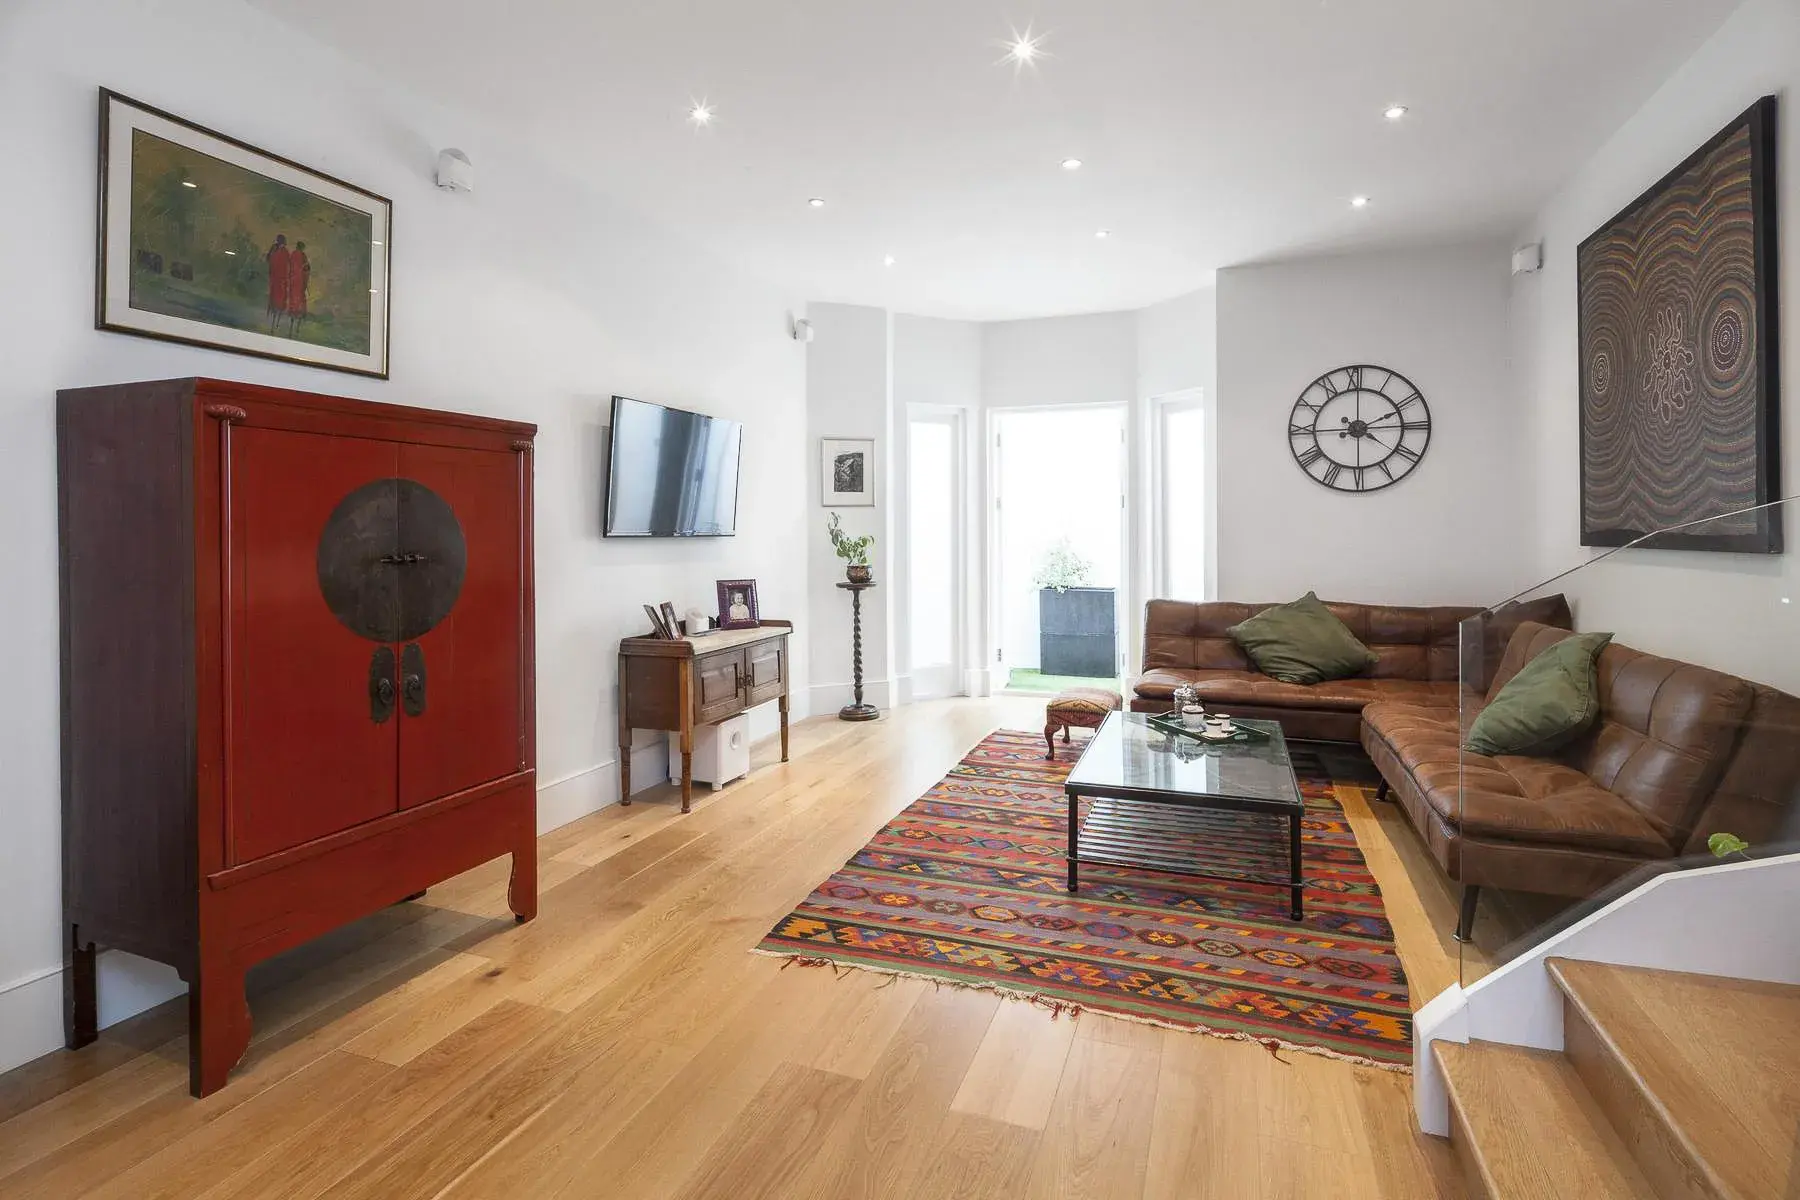 Winchendon Road, holiday home in Fulham, London